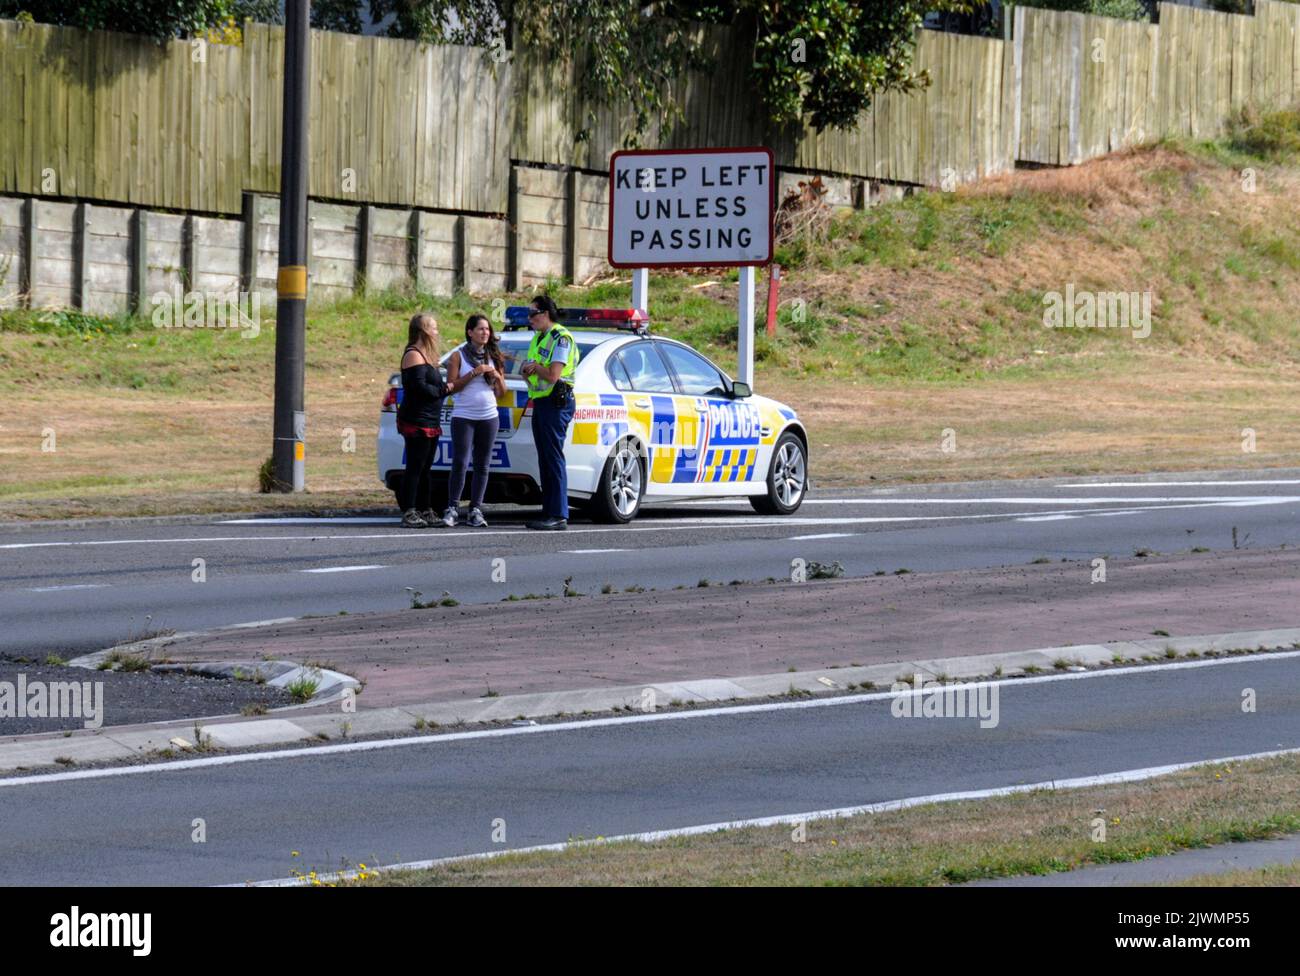 A passing police patrol car takes care of the two young girl tourists who were hitch-hiking on a busy main road in Taupo near the centre of New Zealan Stock Photo